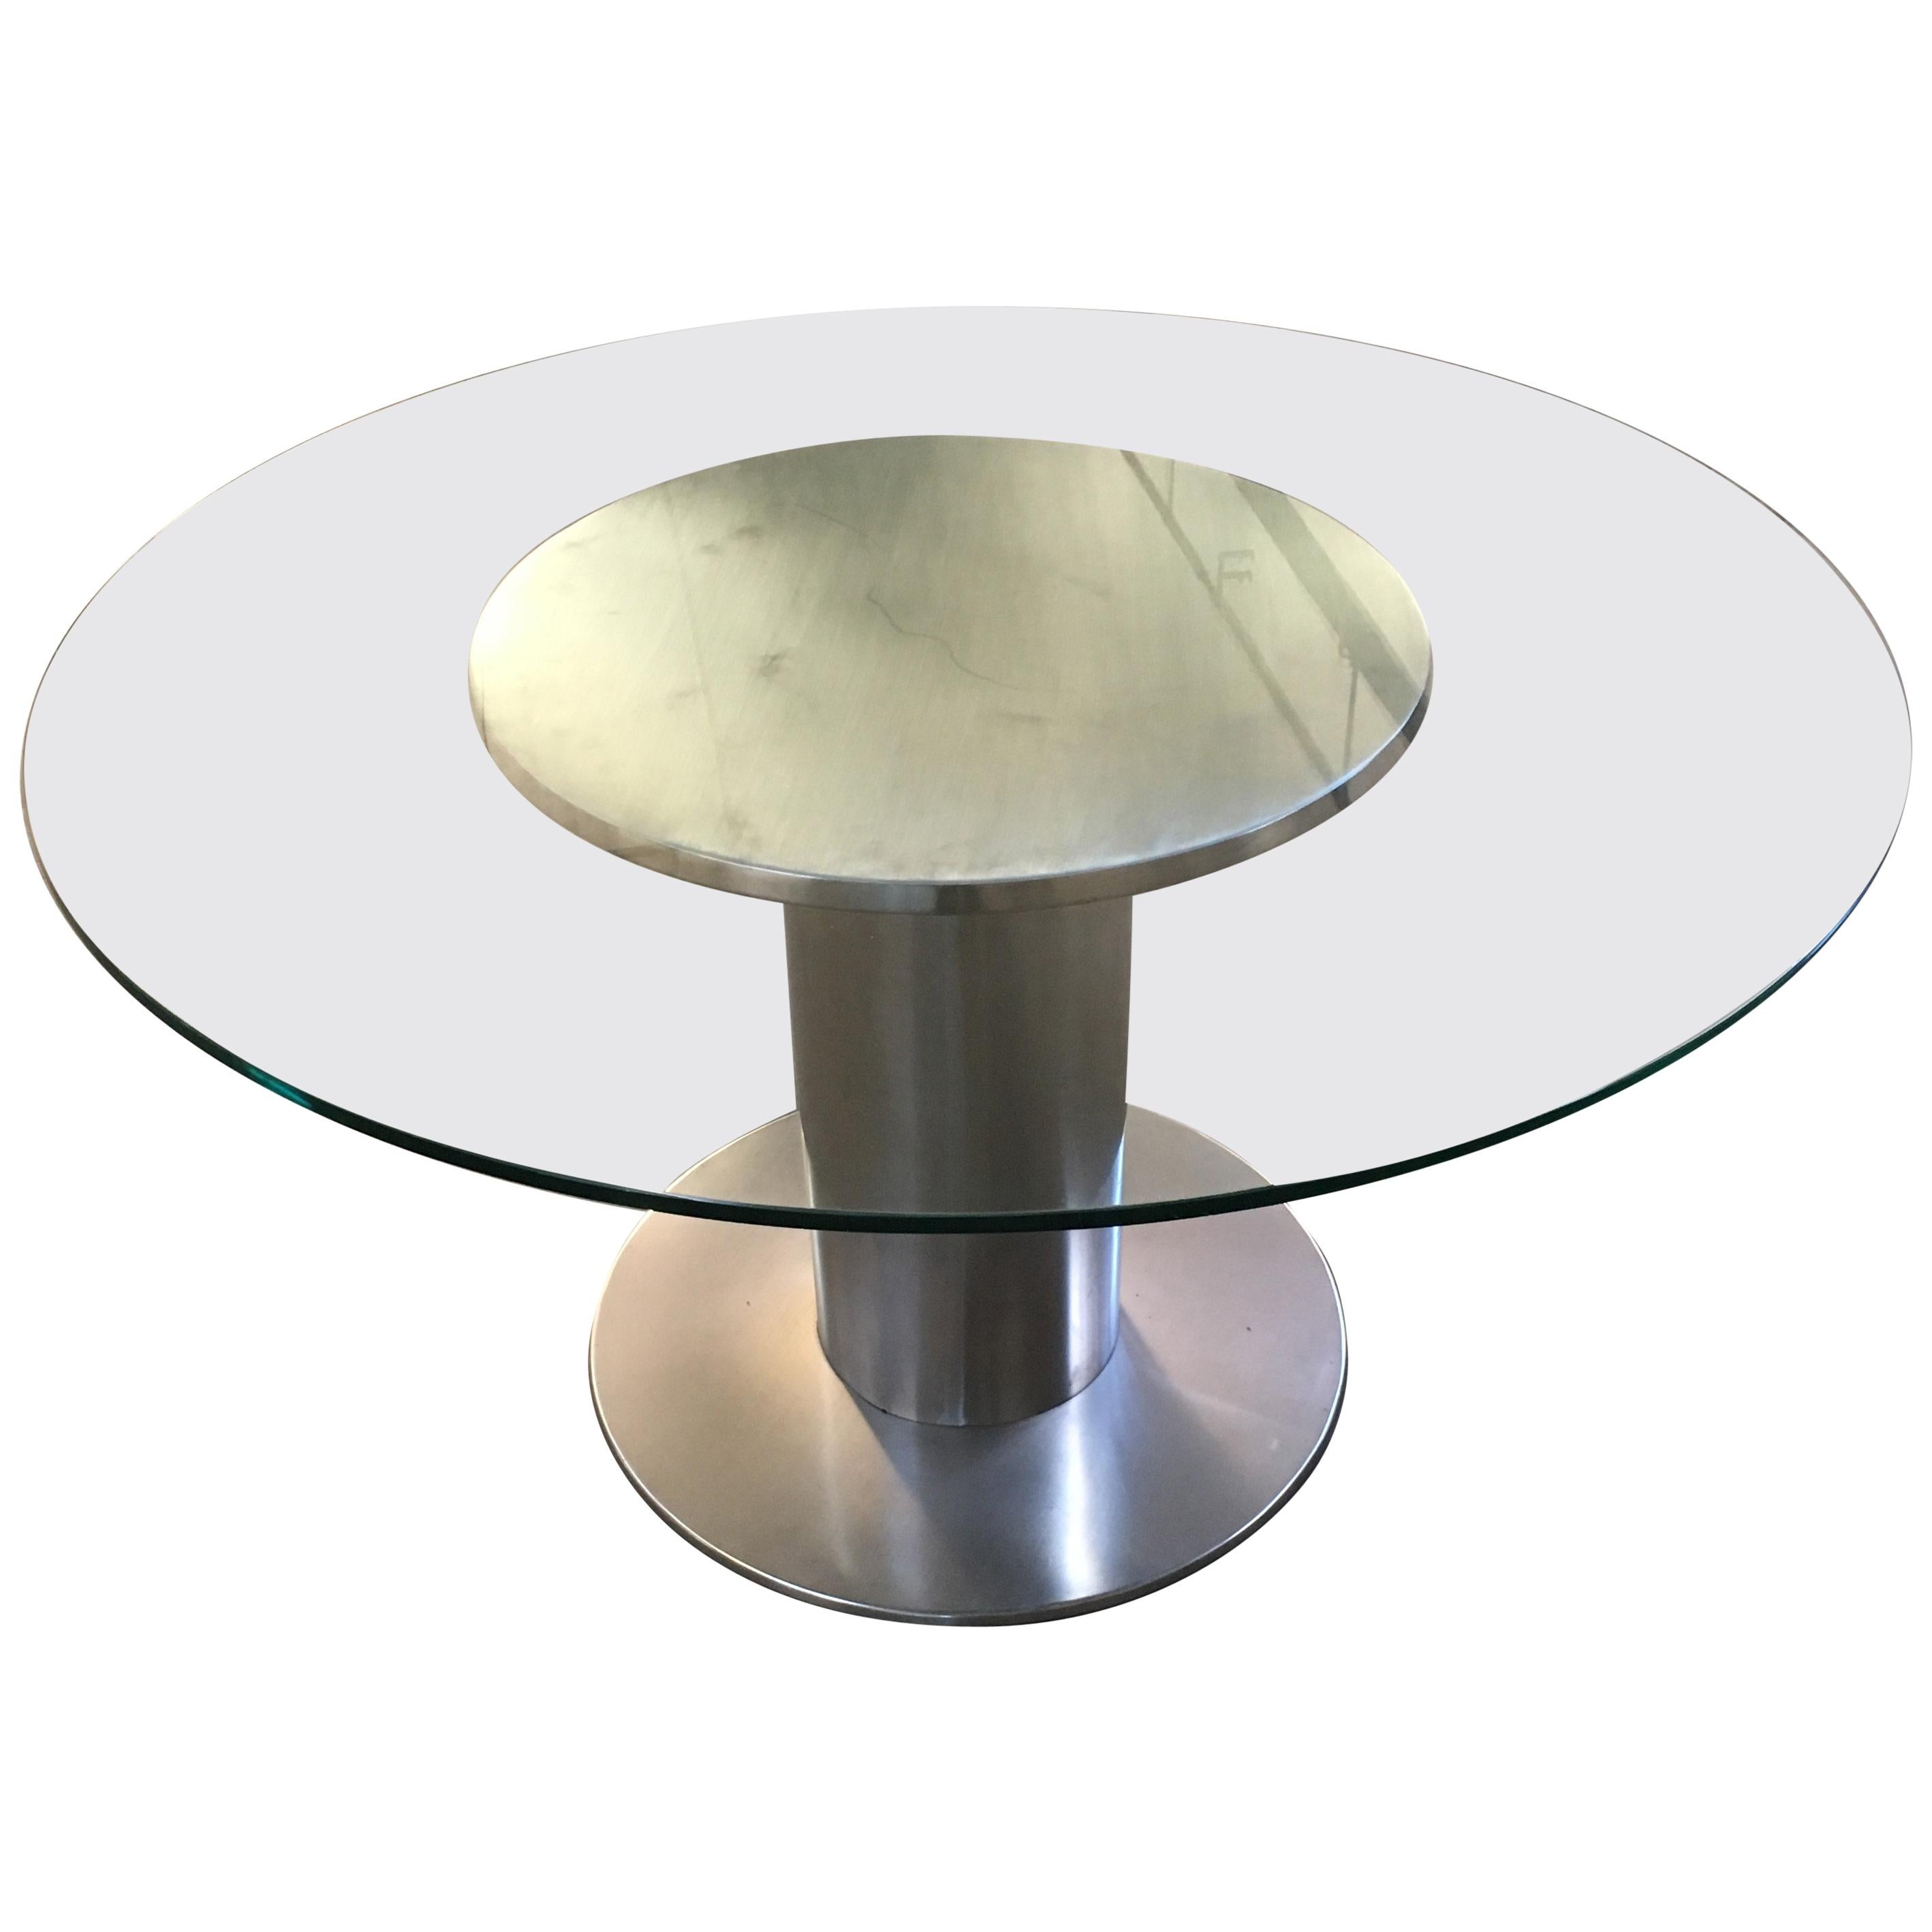 Mid-Century Modern Italian Chrome Dining Table with Glass Top, 1970s